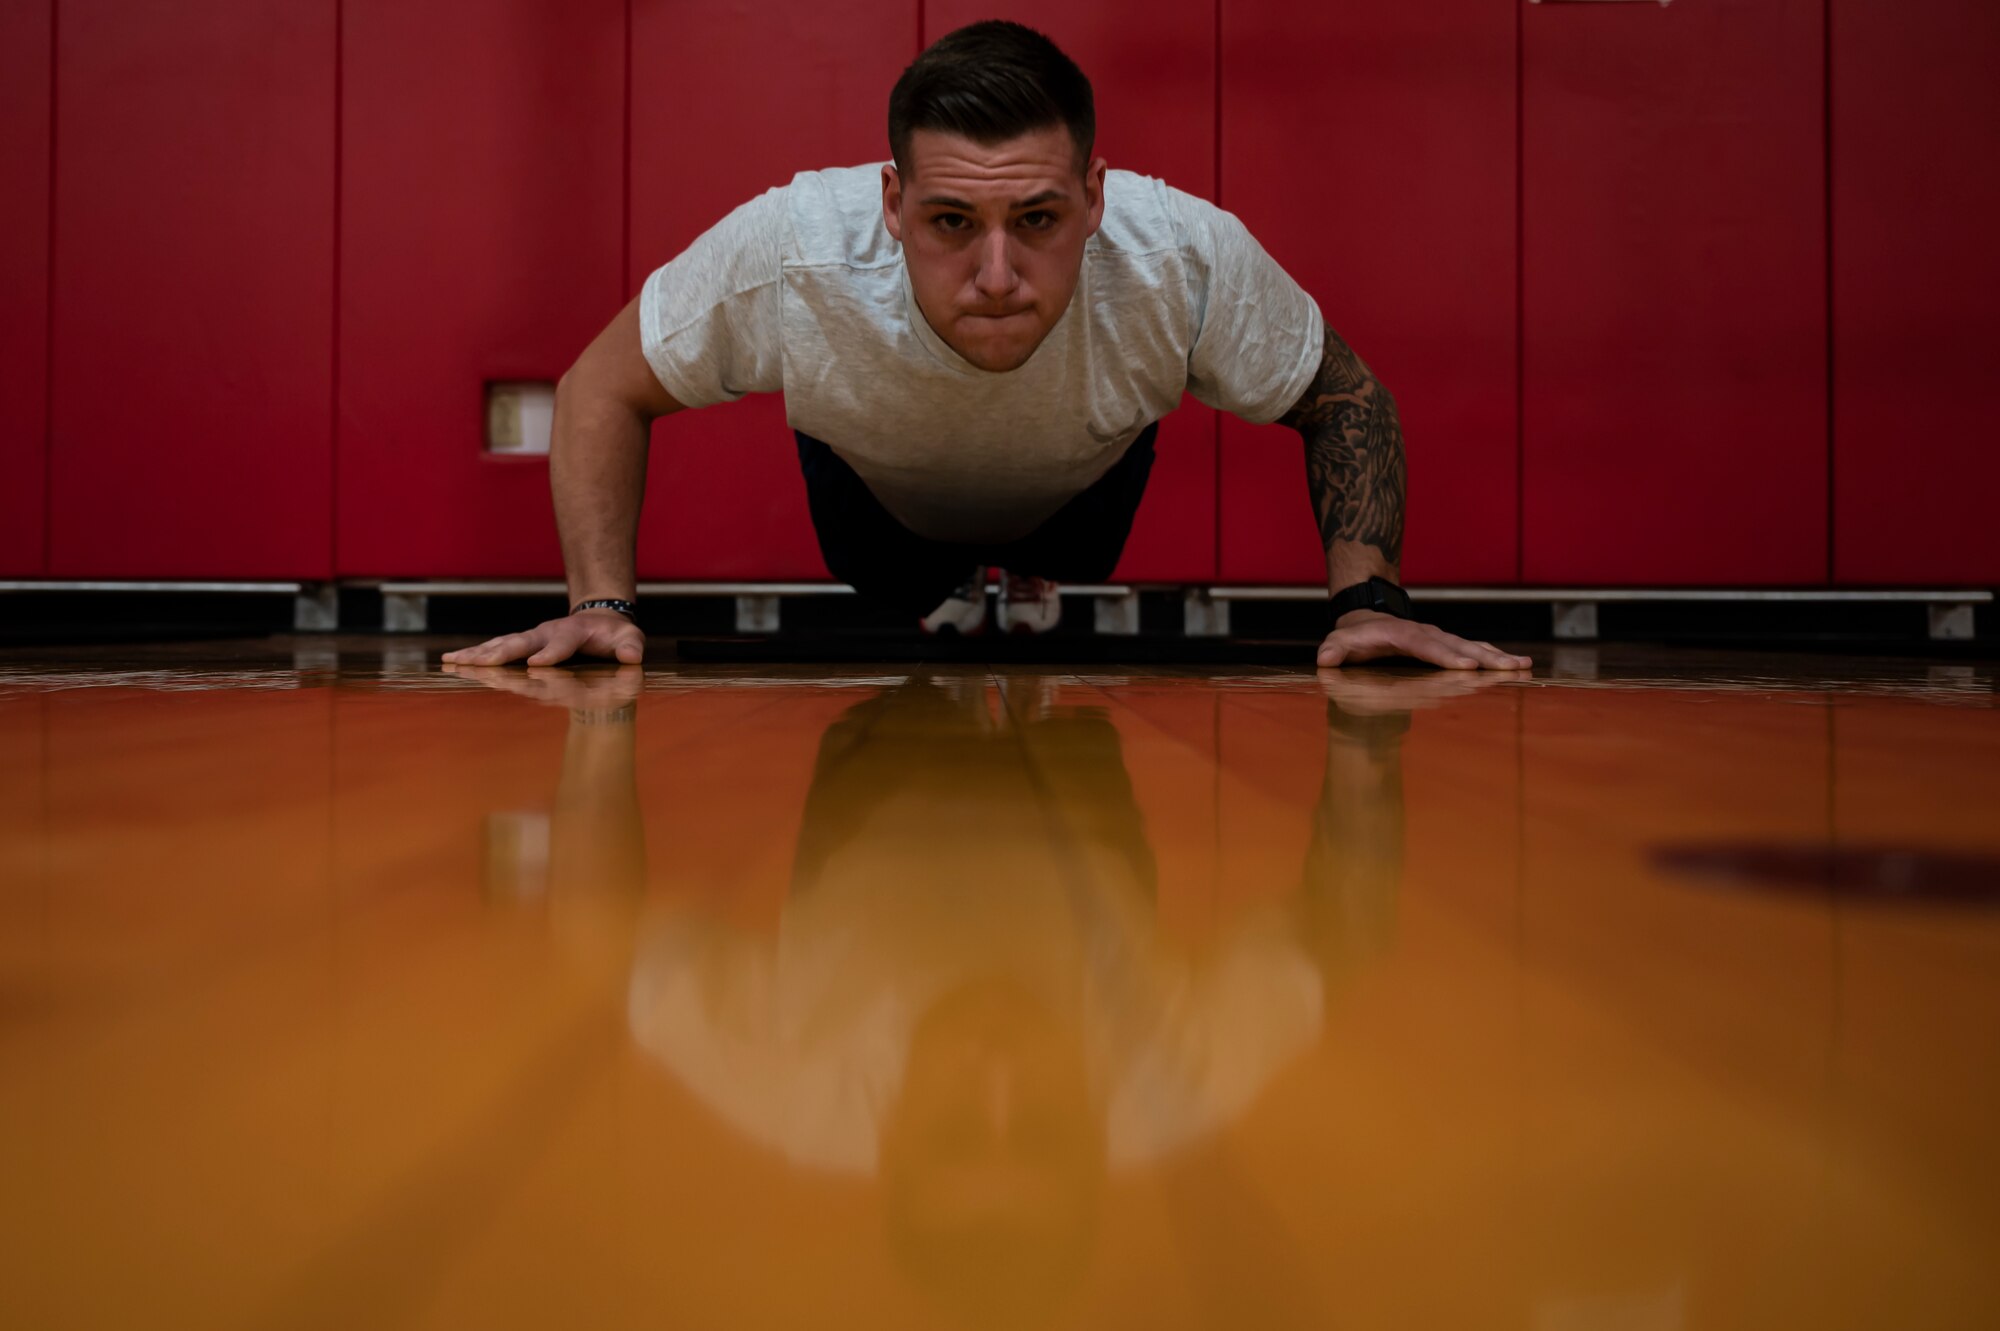 Senior Airman Jimmy Larkin, 911th Security Forces Squadron patrolman, performs a push-up during a physical fitness test at the Pittsburgh International Airport Air Reserve Station, Pennsylvania, July 29, 2021. The U.S. Air Force started conducting fitness tests in July after a brief hiatus due to COVID-19.